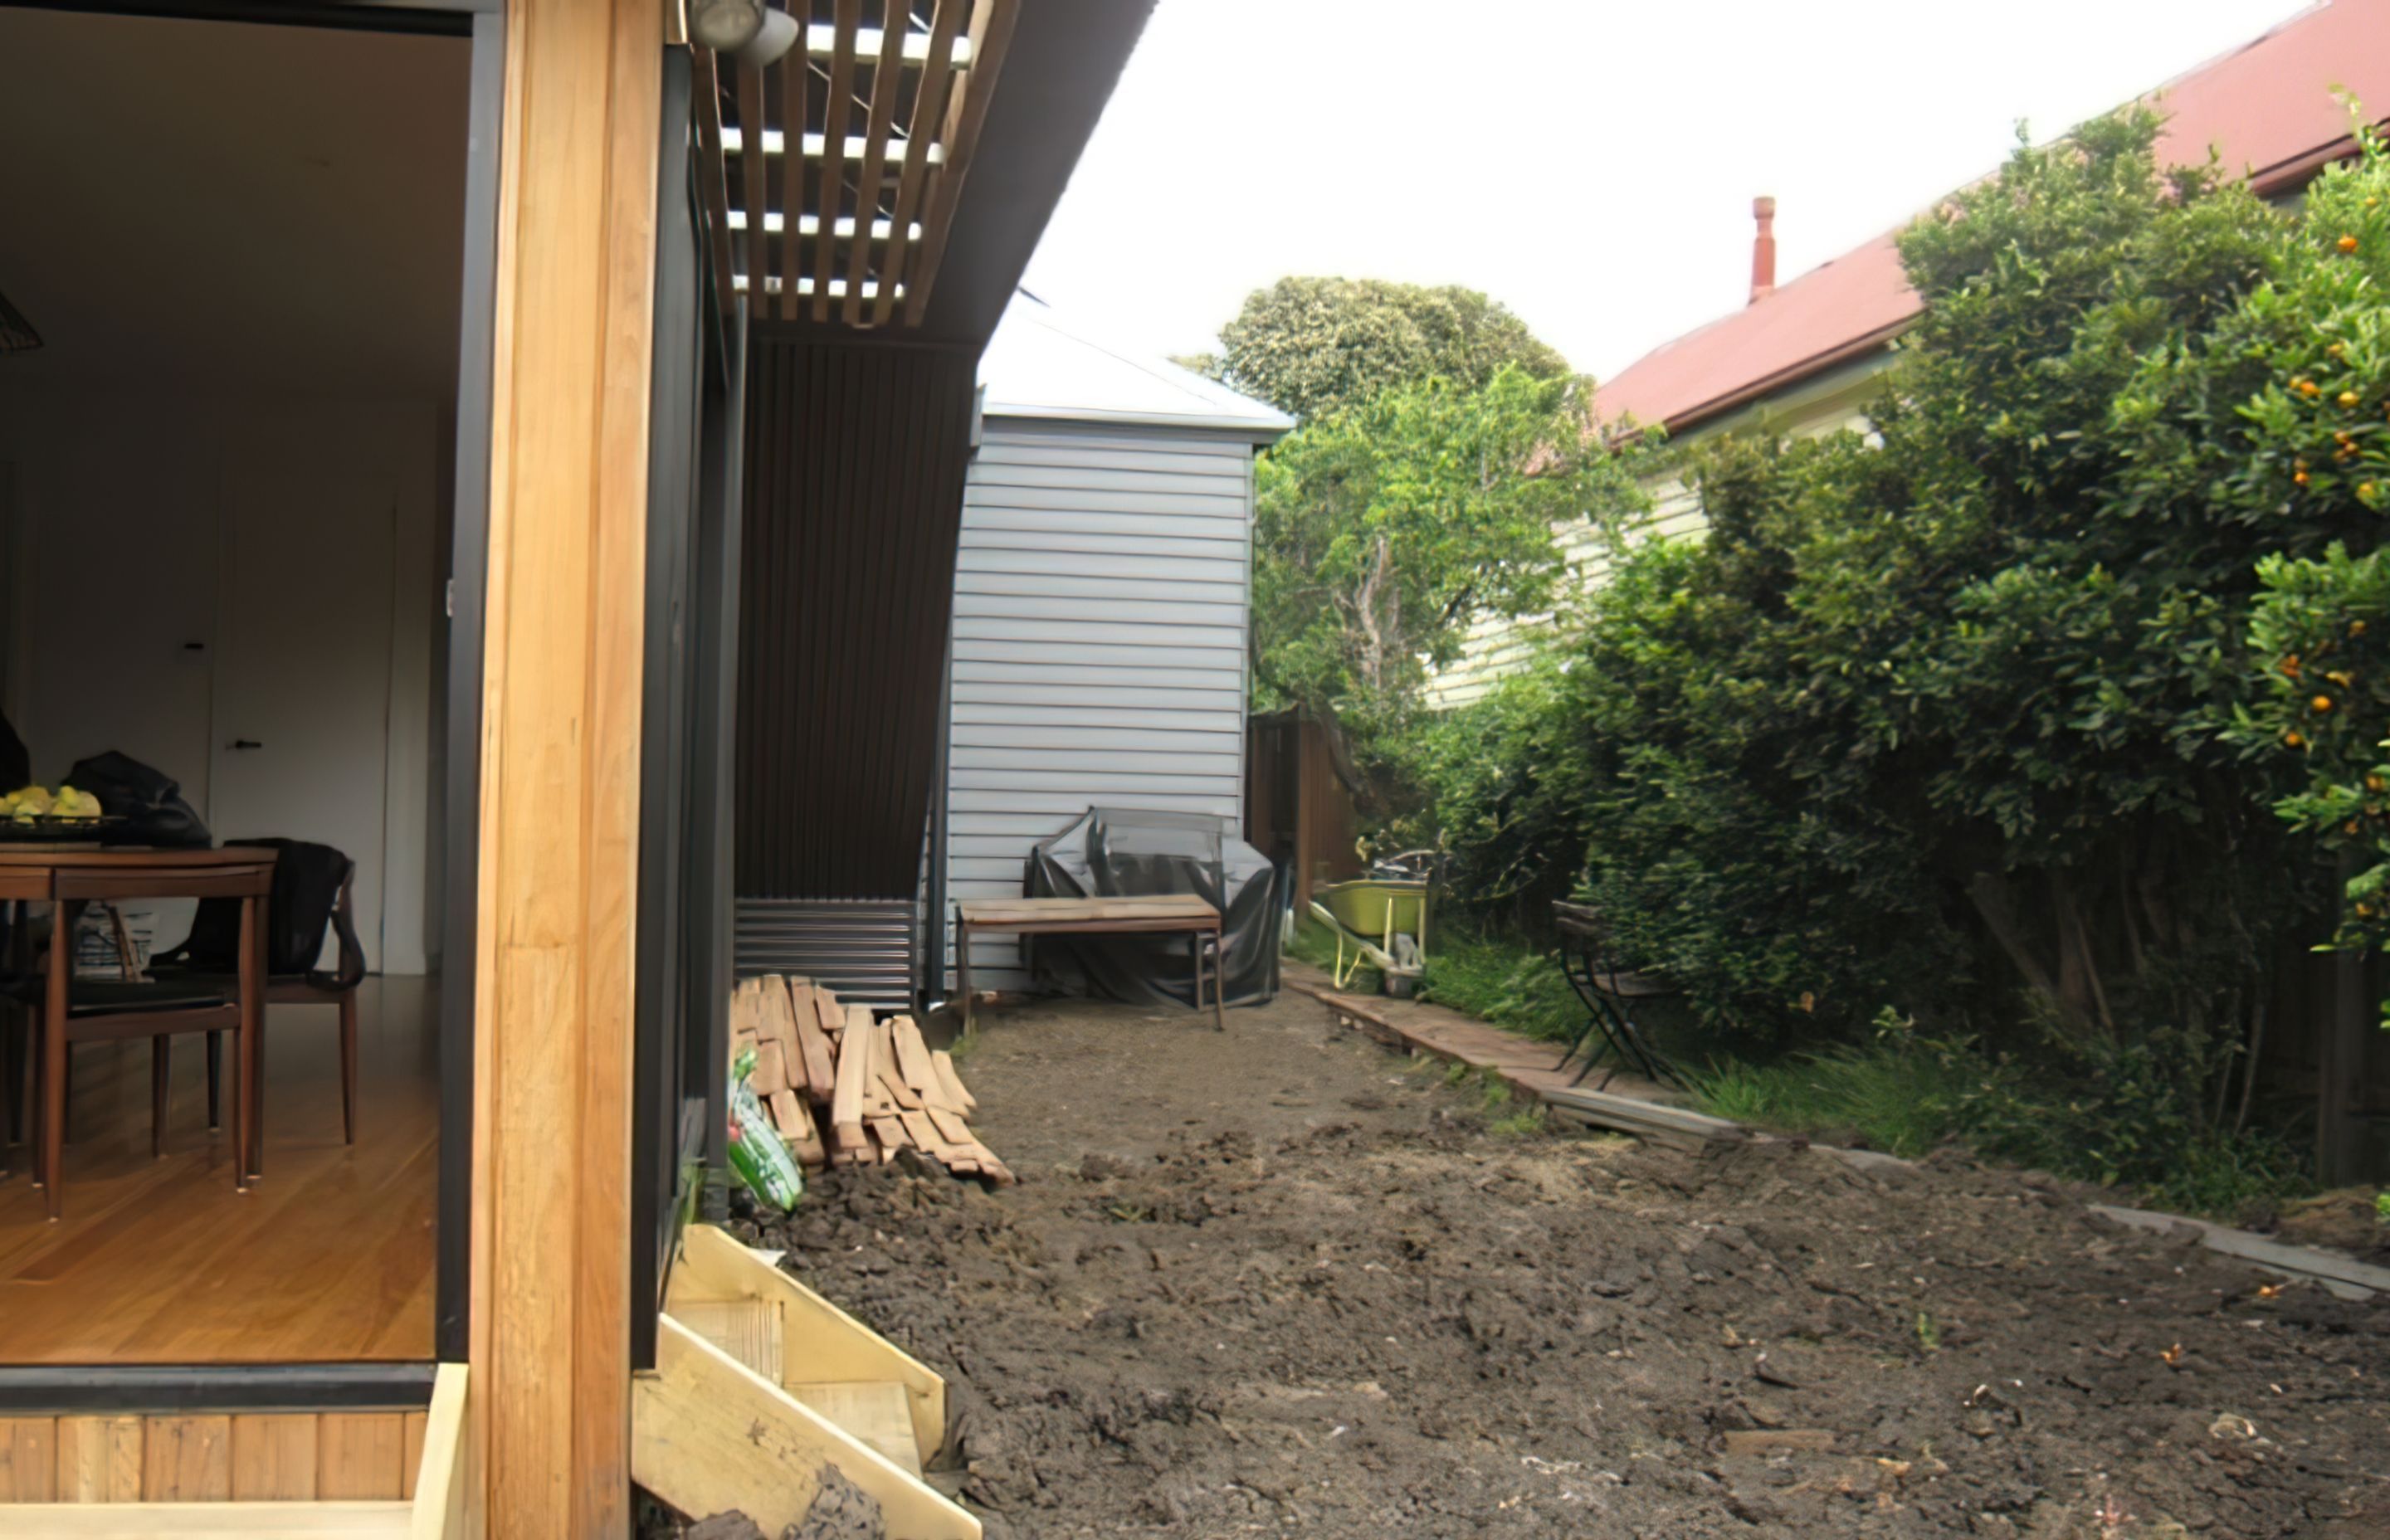 BEFORE the garden design. The rear french doors lead to nowhere.